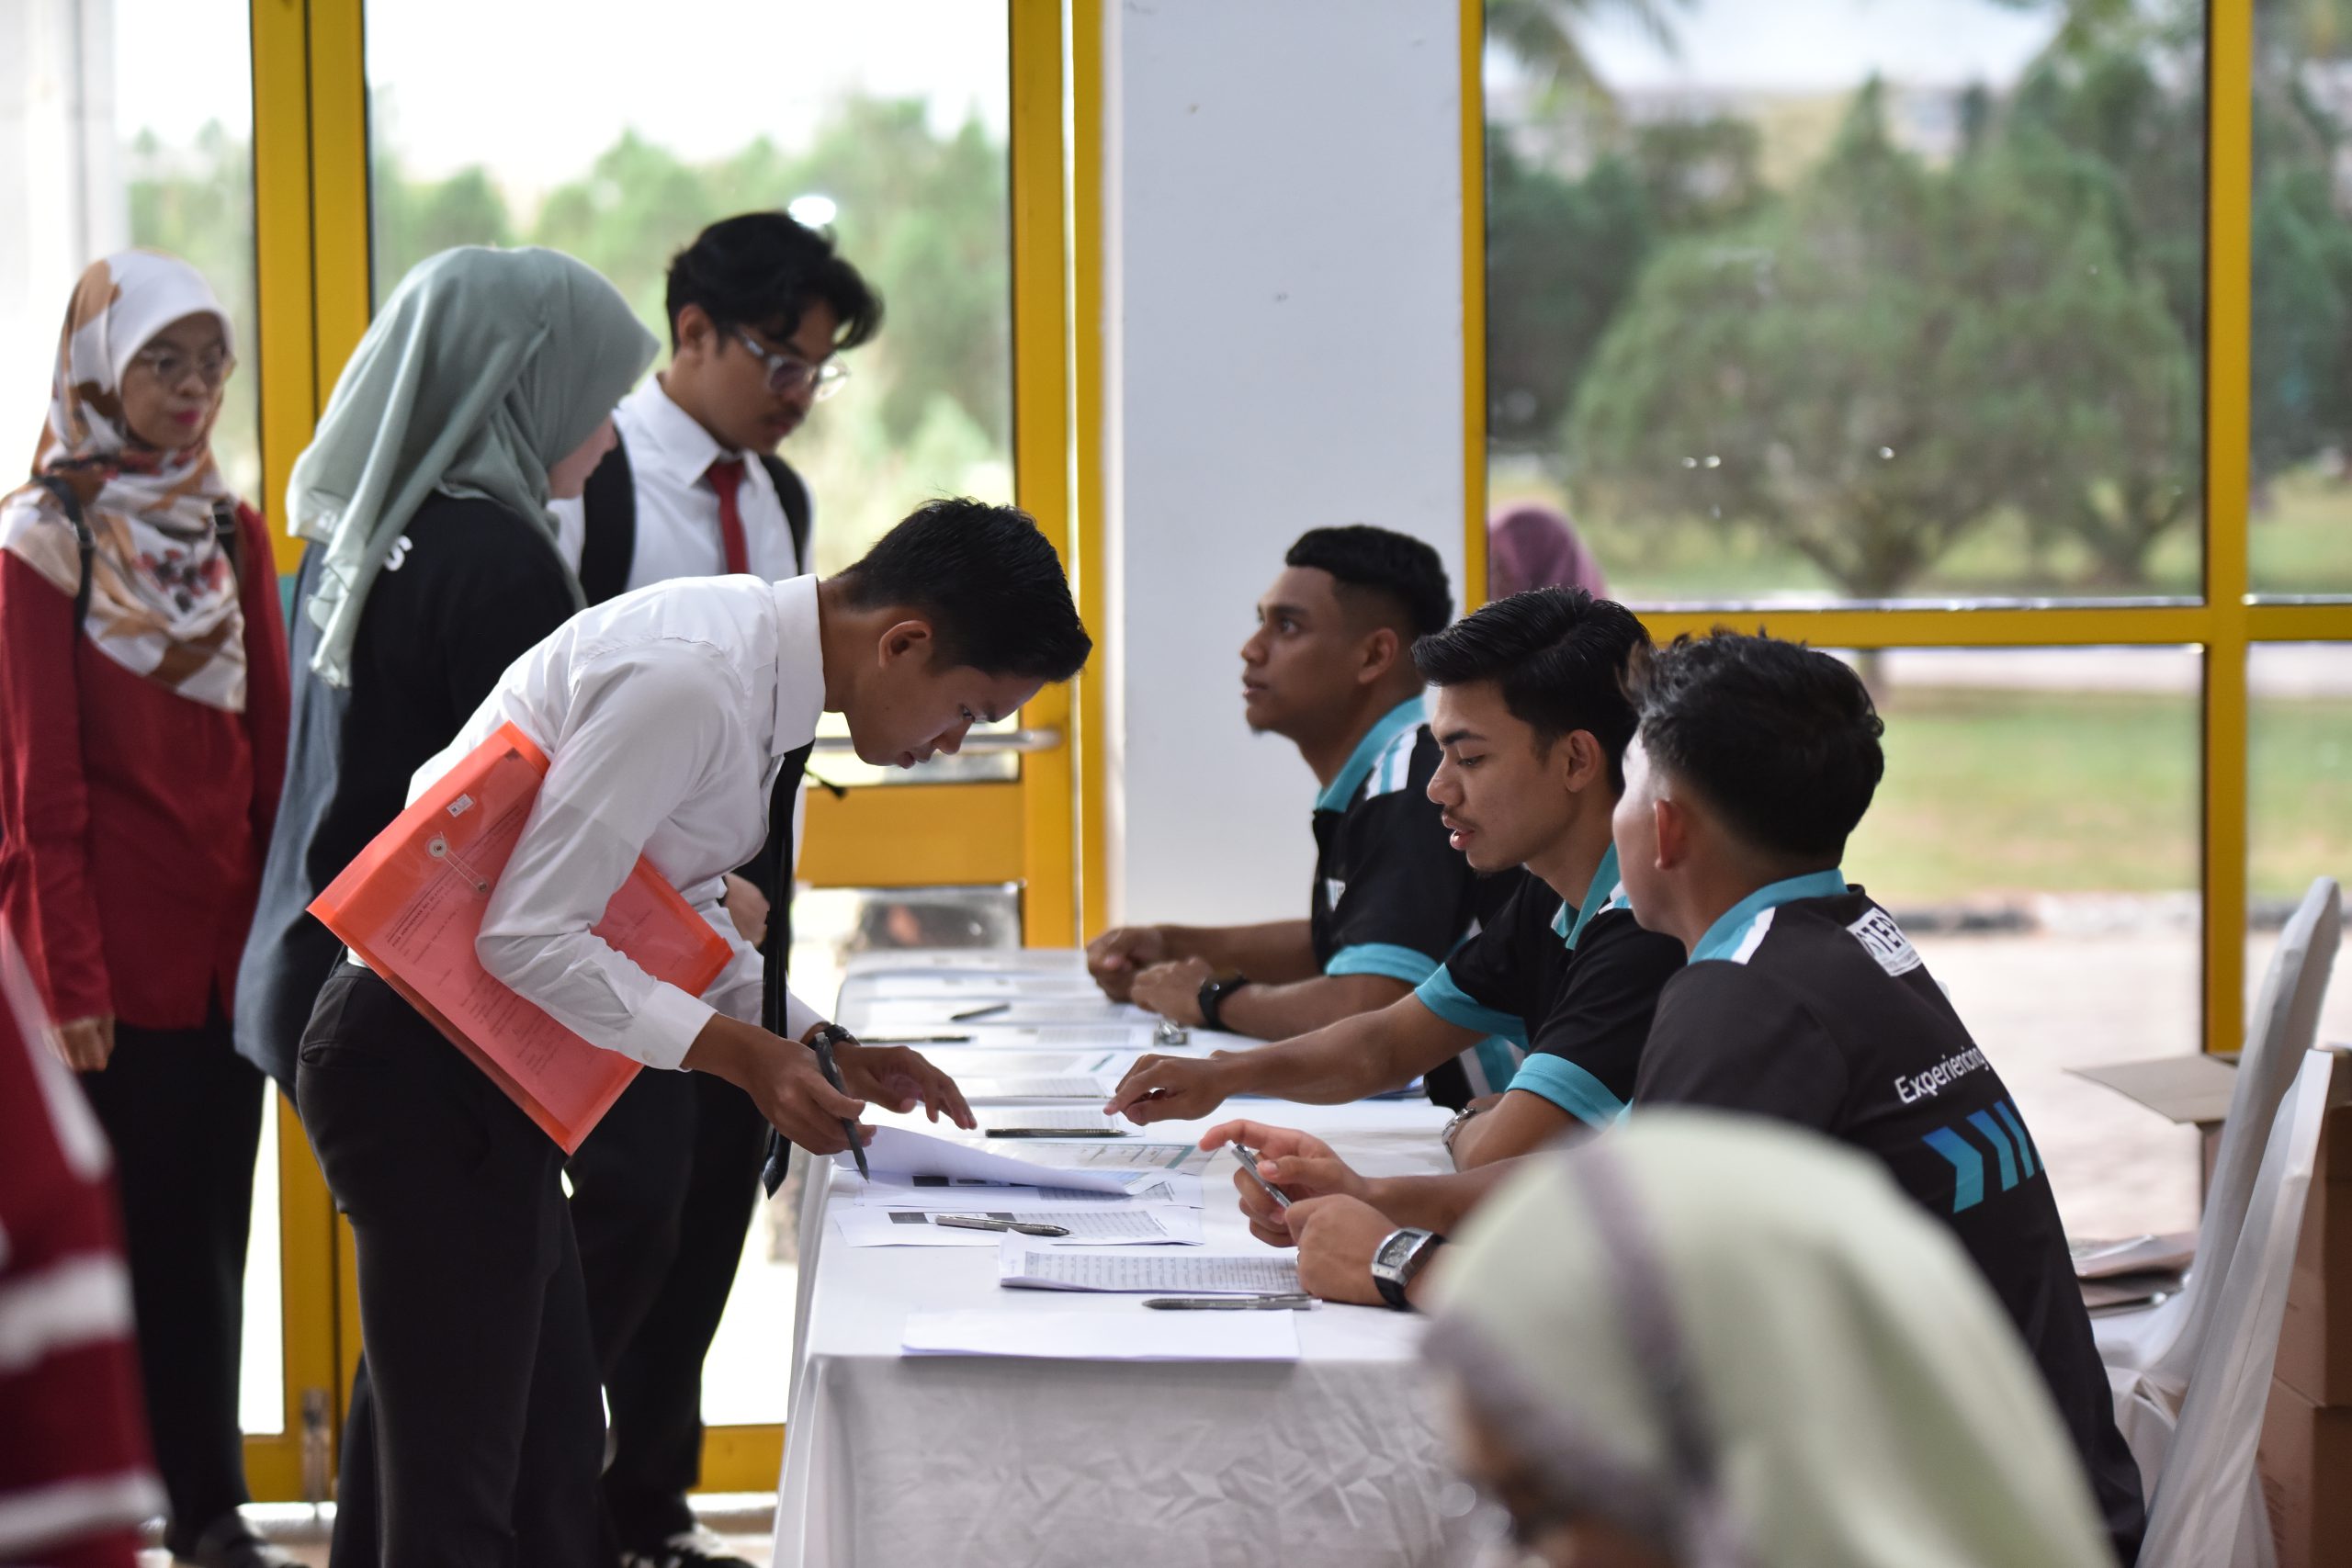 Students registering during the registration day.